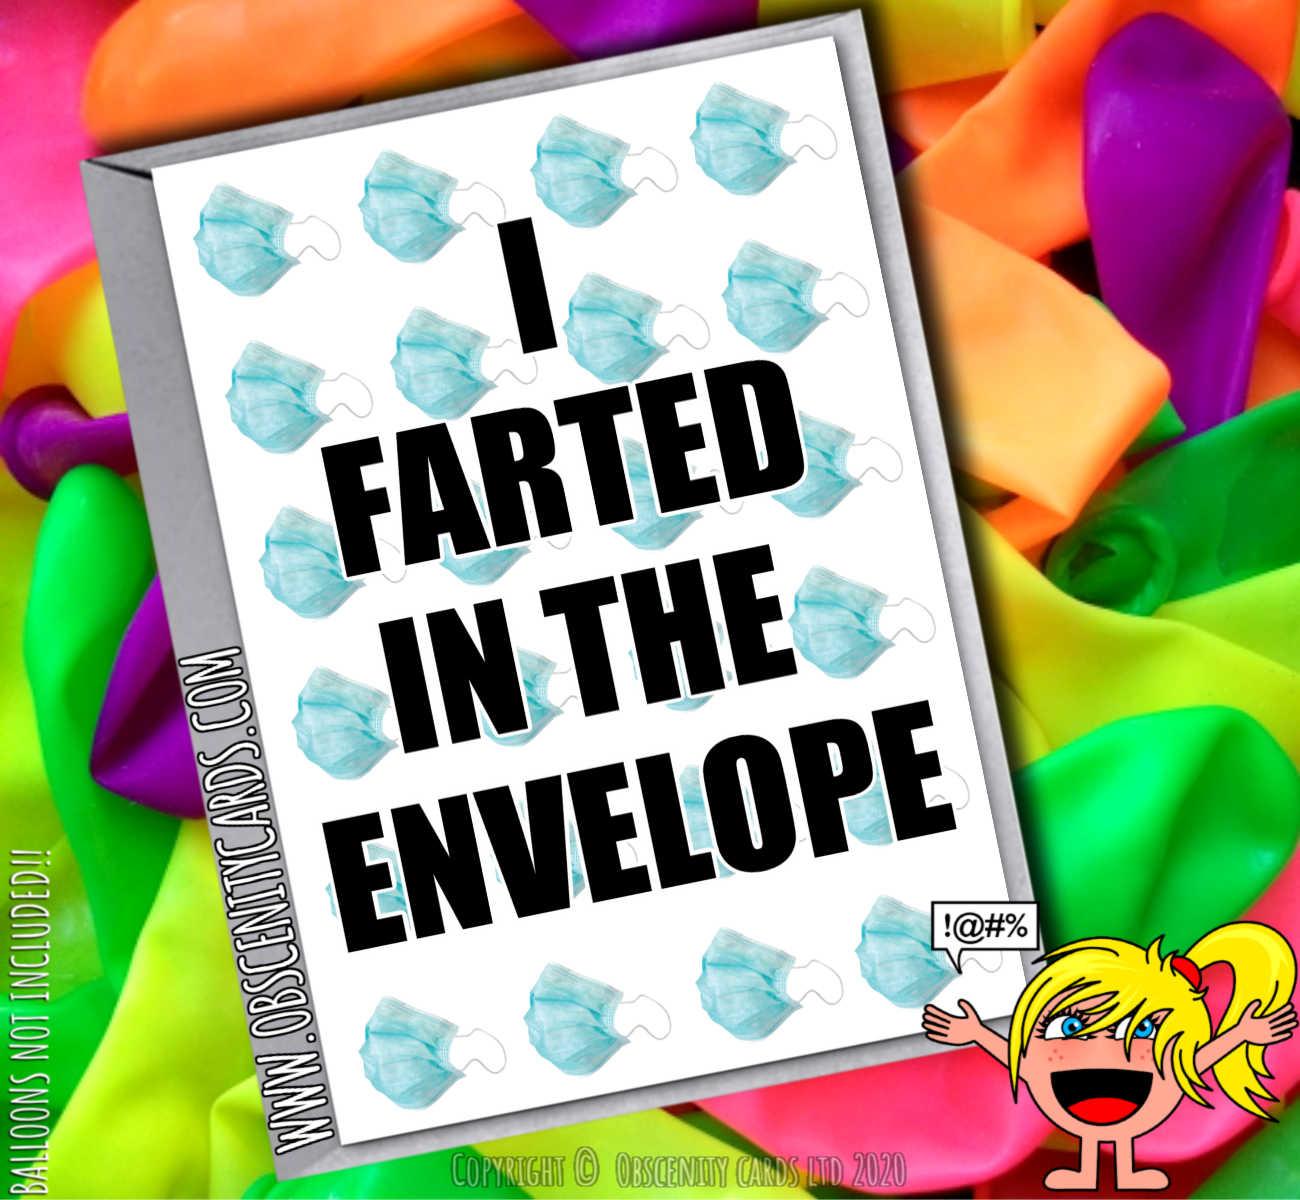 I FARTED IN THE ENVELOPE SELF ISOLATION CARD